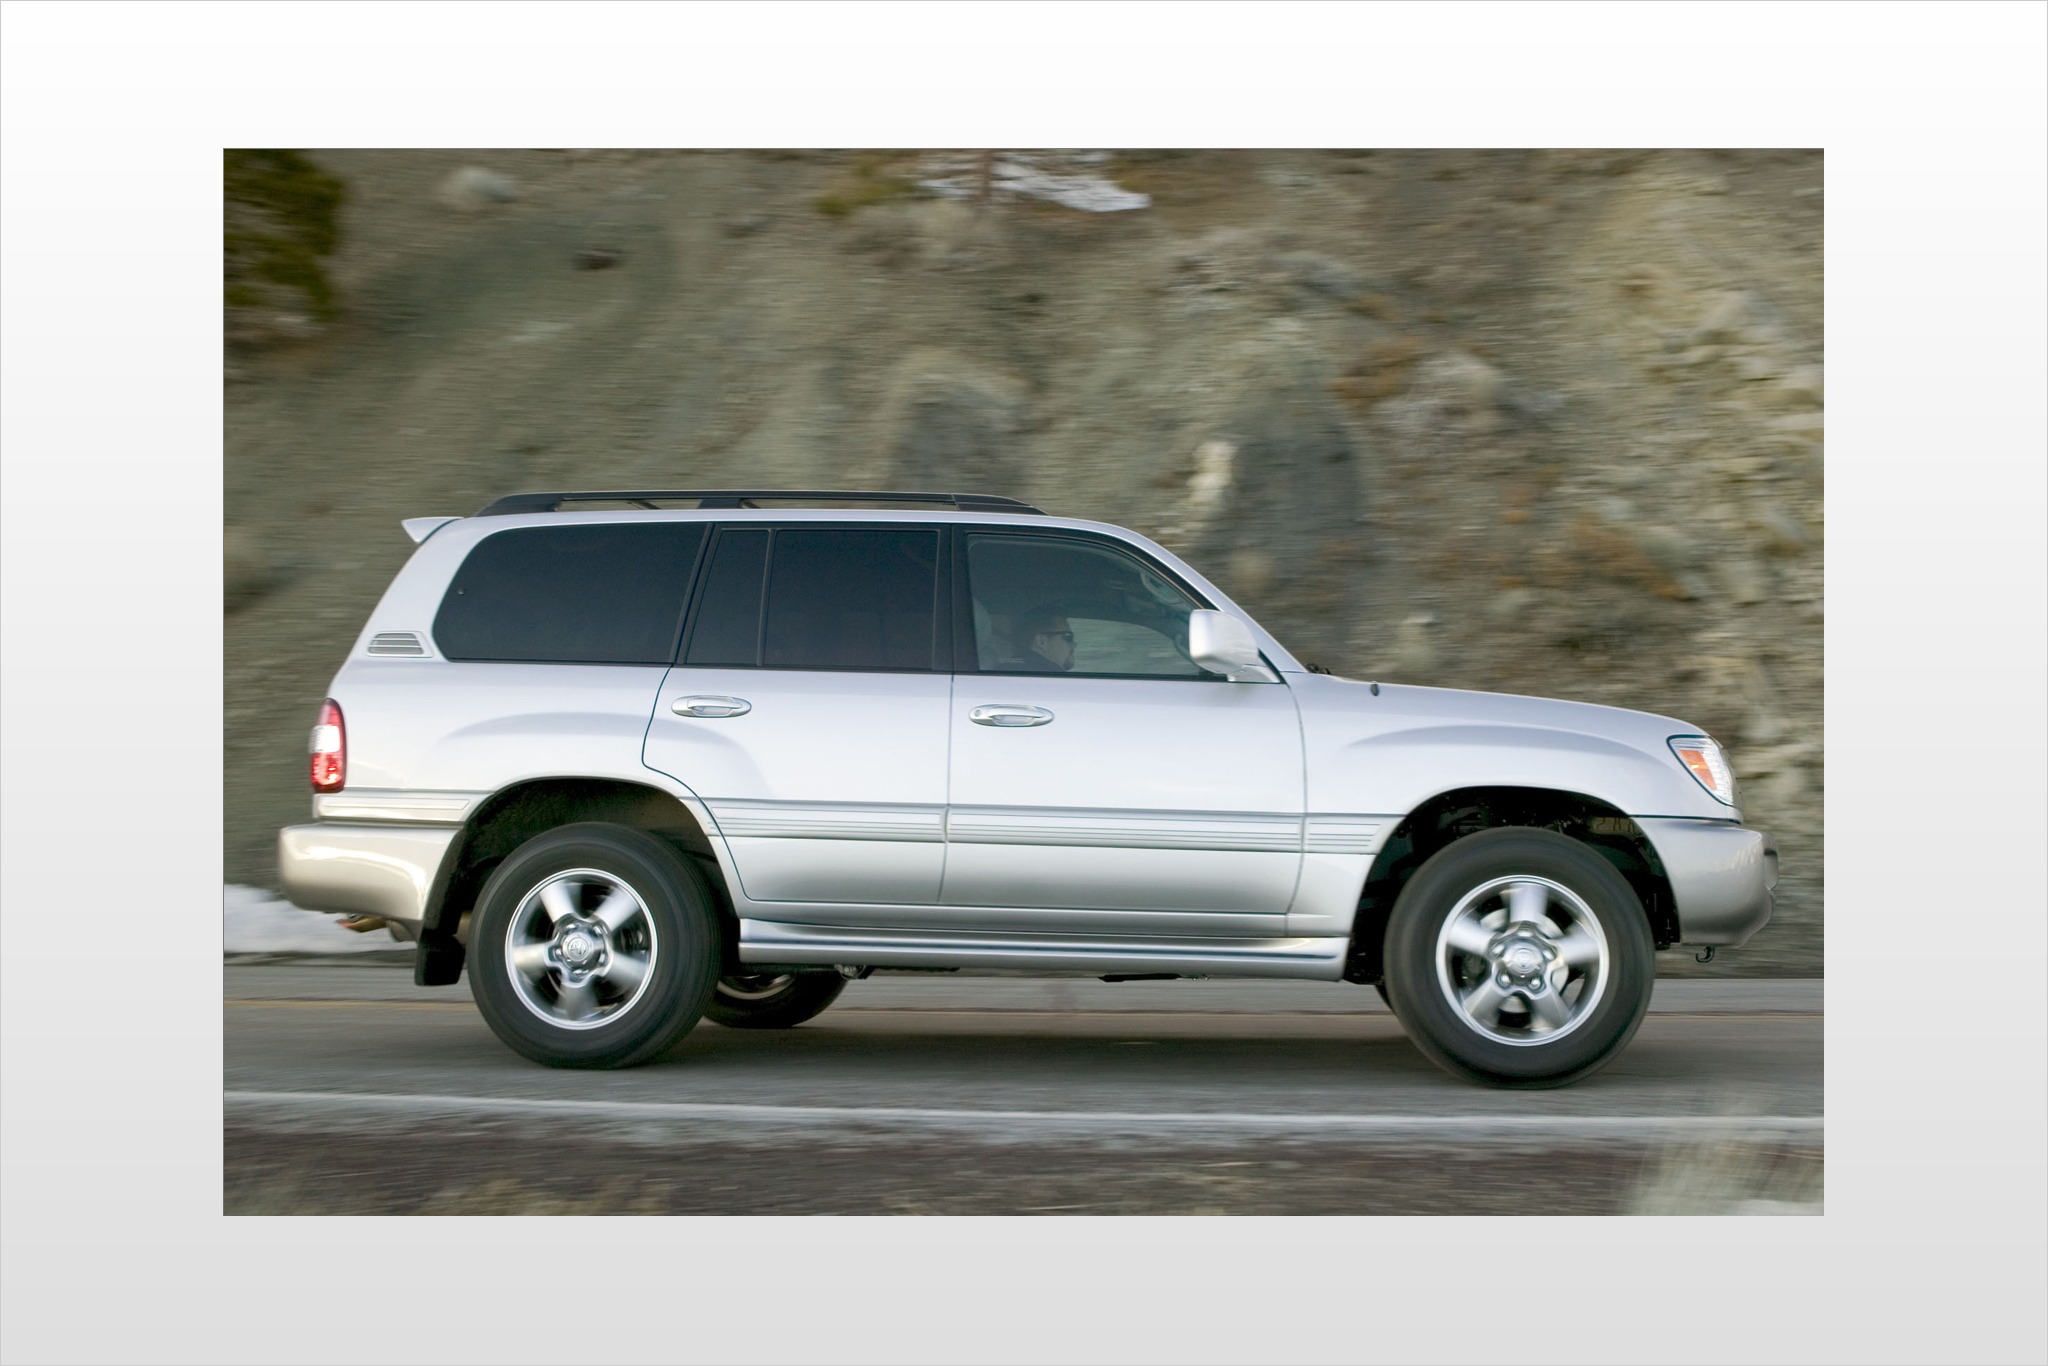 2007 Toyota Land Cruiser VIN Number Search - AutoDetective